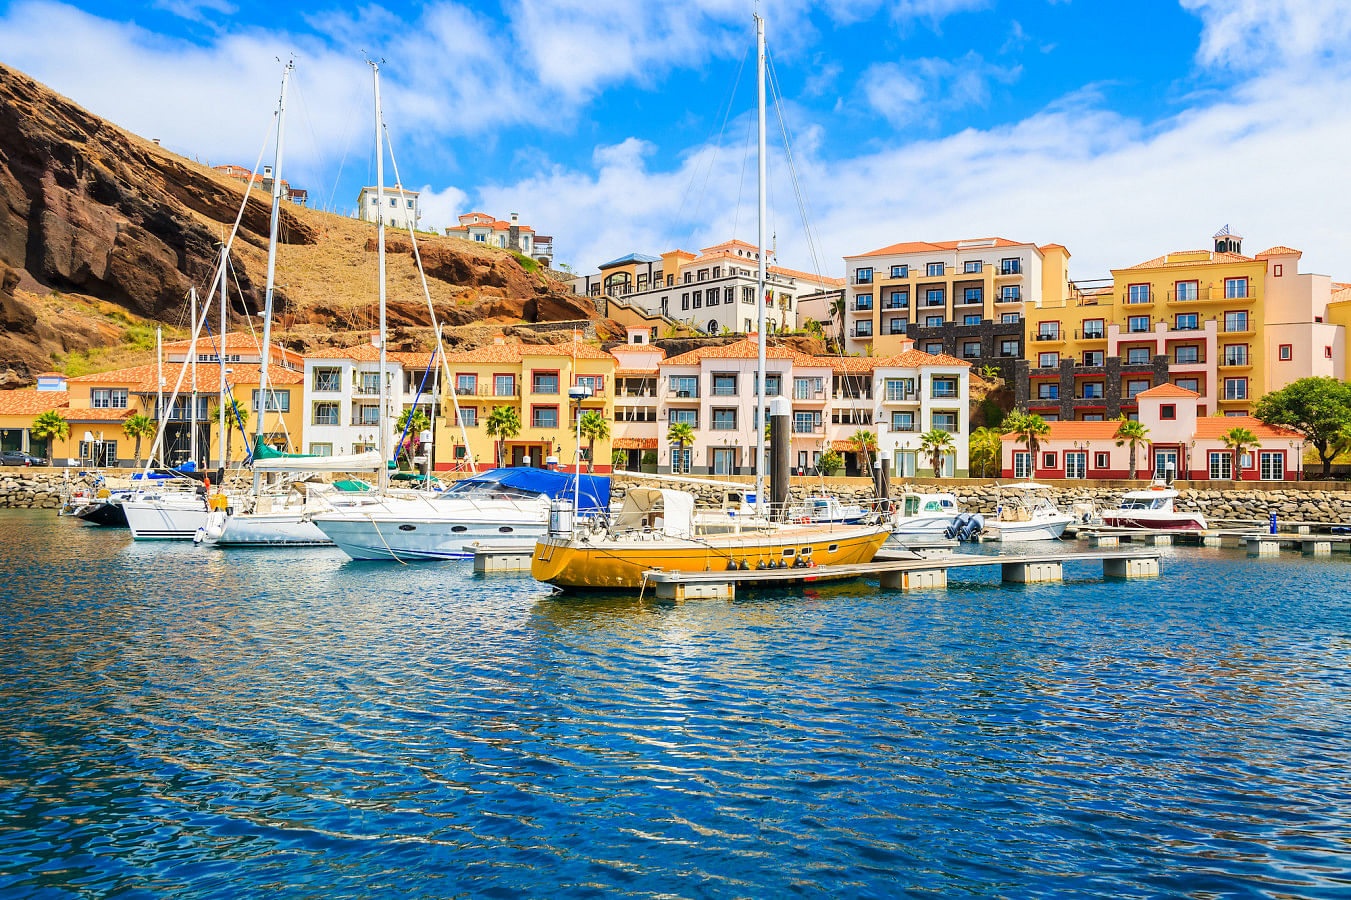 Rent a boat in Funchal